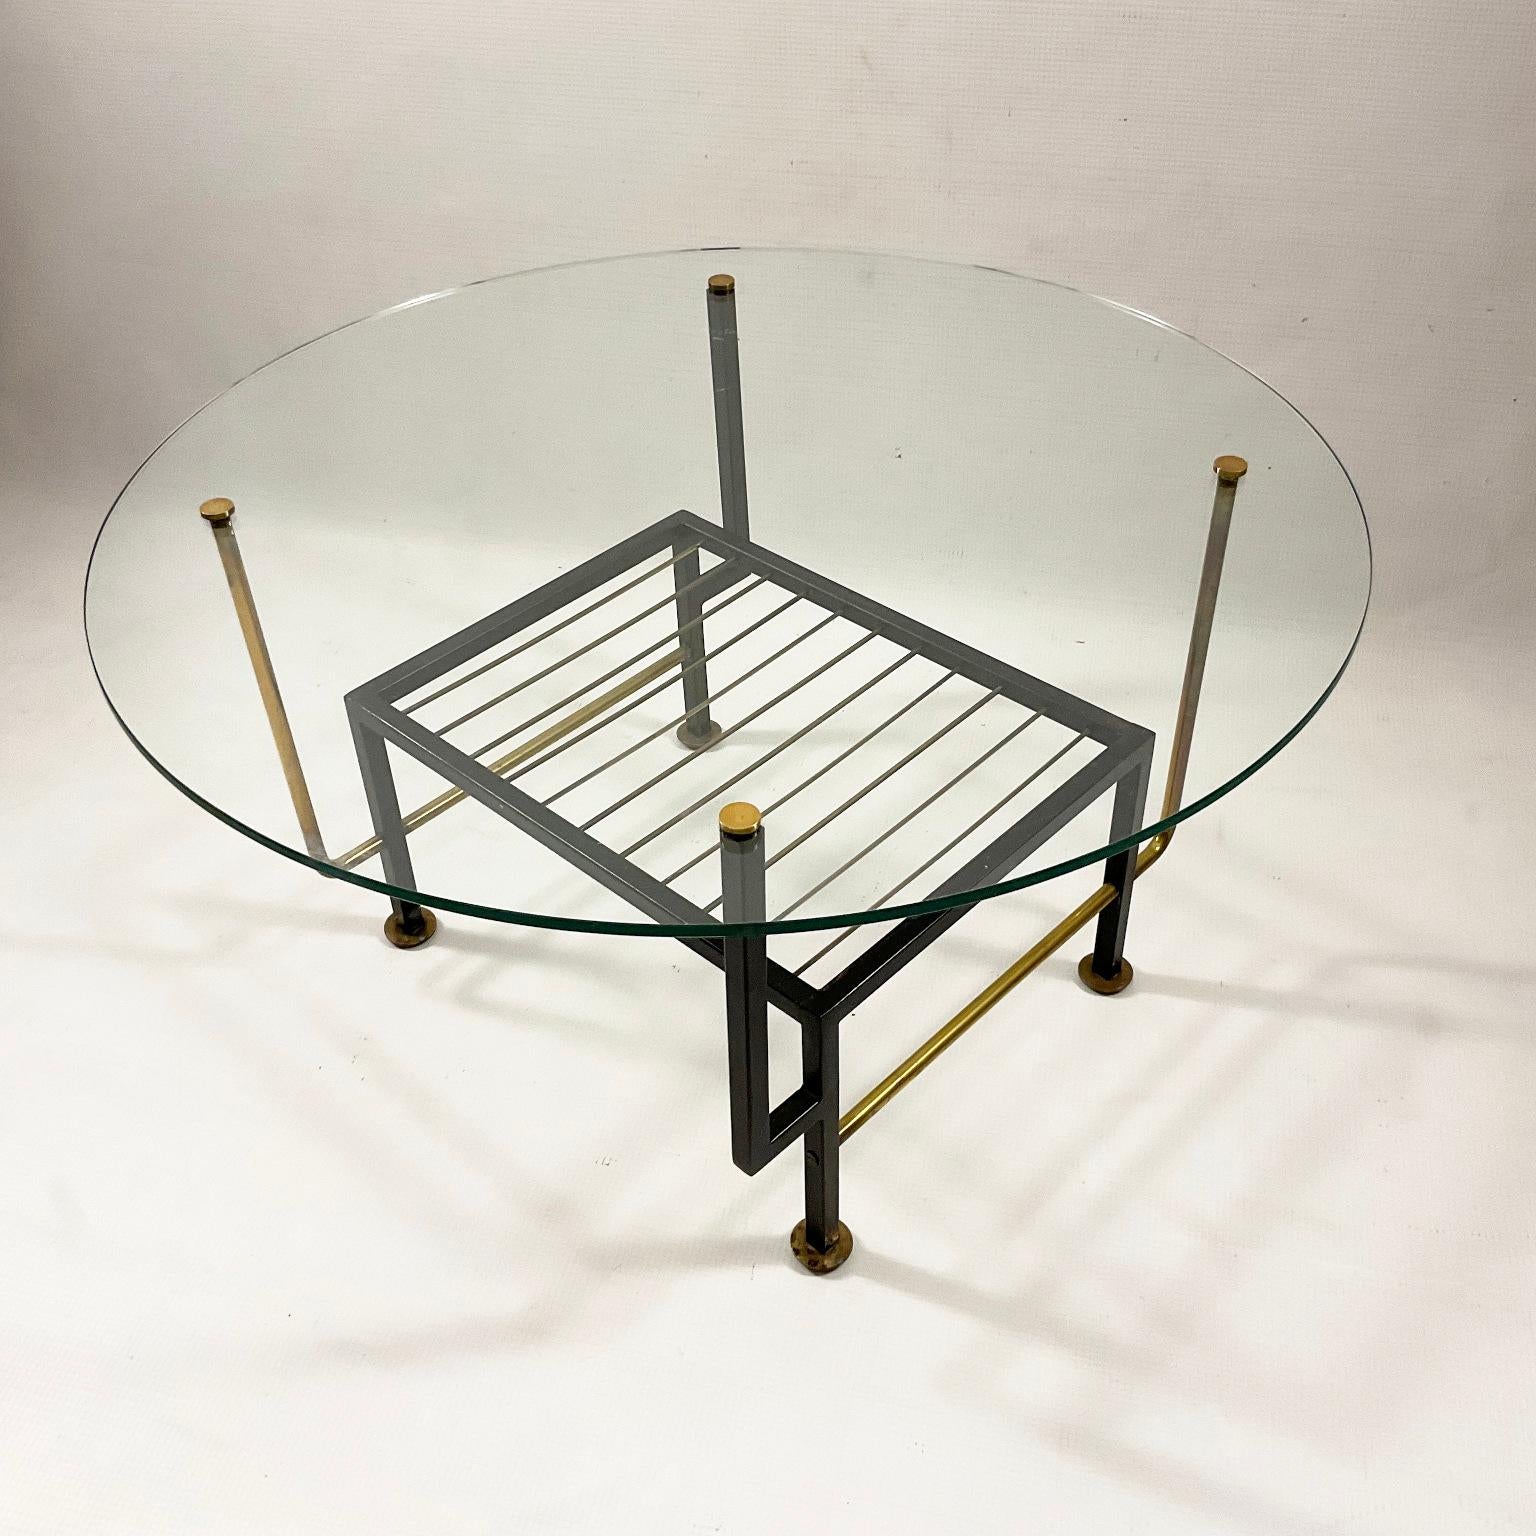 French coffee table from the 1950s with a magazine rack. 
Structure in brass and black enameled metal with its original round glass top. 
The shapes of this coffee table are reminiscent of certain creations by the famous French designer Mathieu